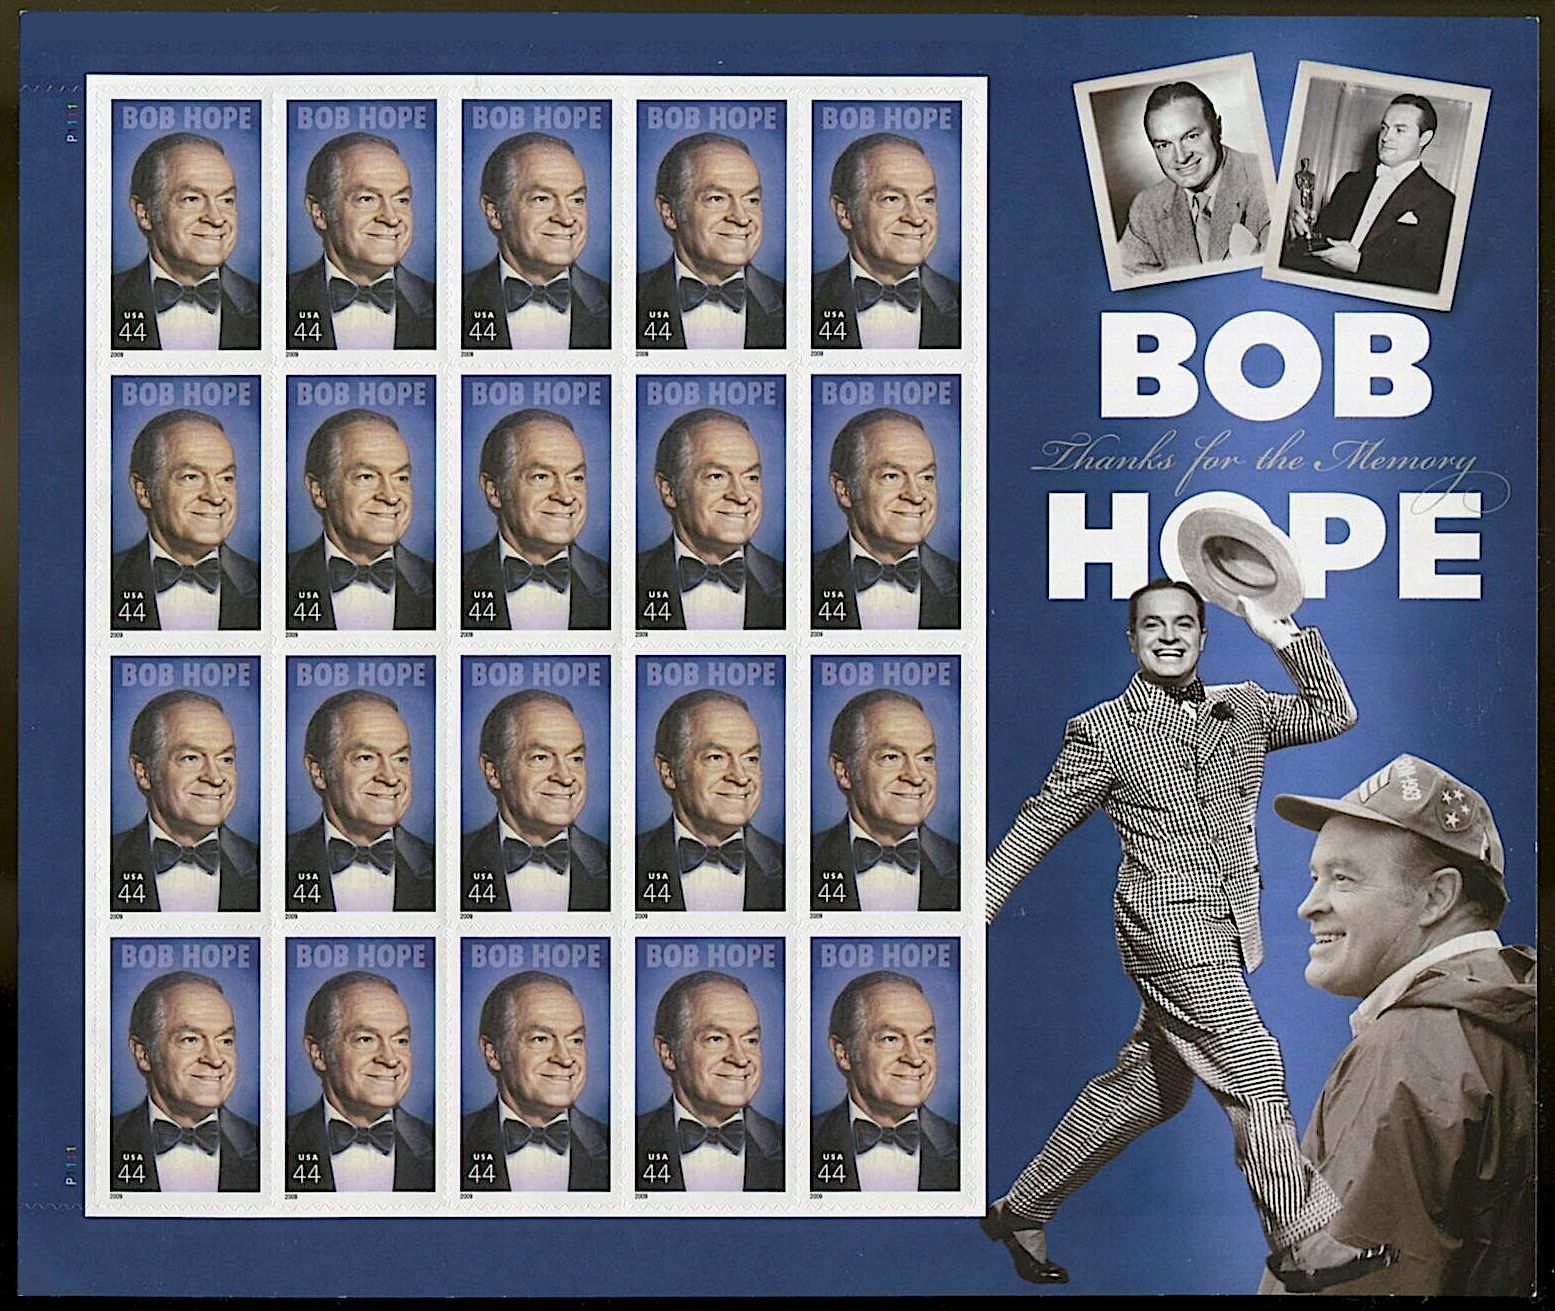 2009 BOB HOPE, MNH Sheet 20 x 44¢ STAMPS: #4406, Thanks for the Memory, Memories Без бренда